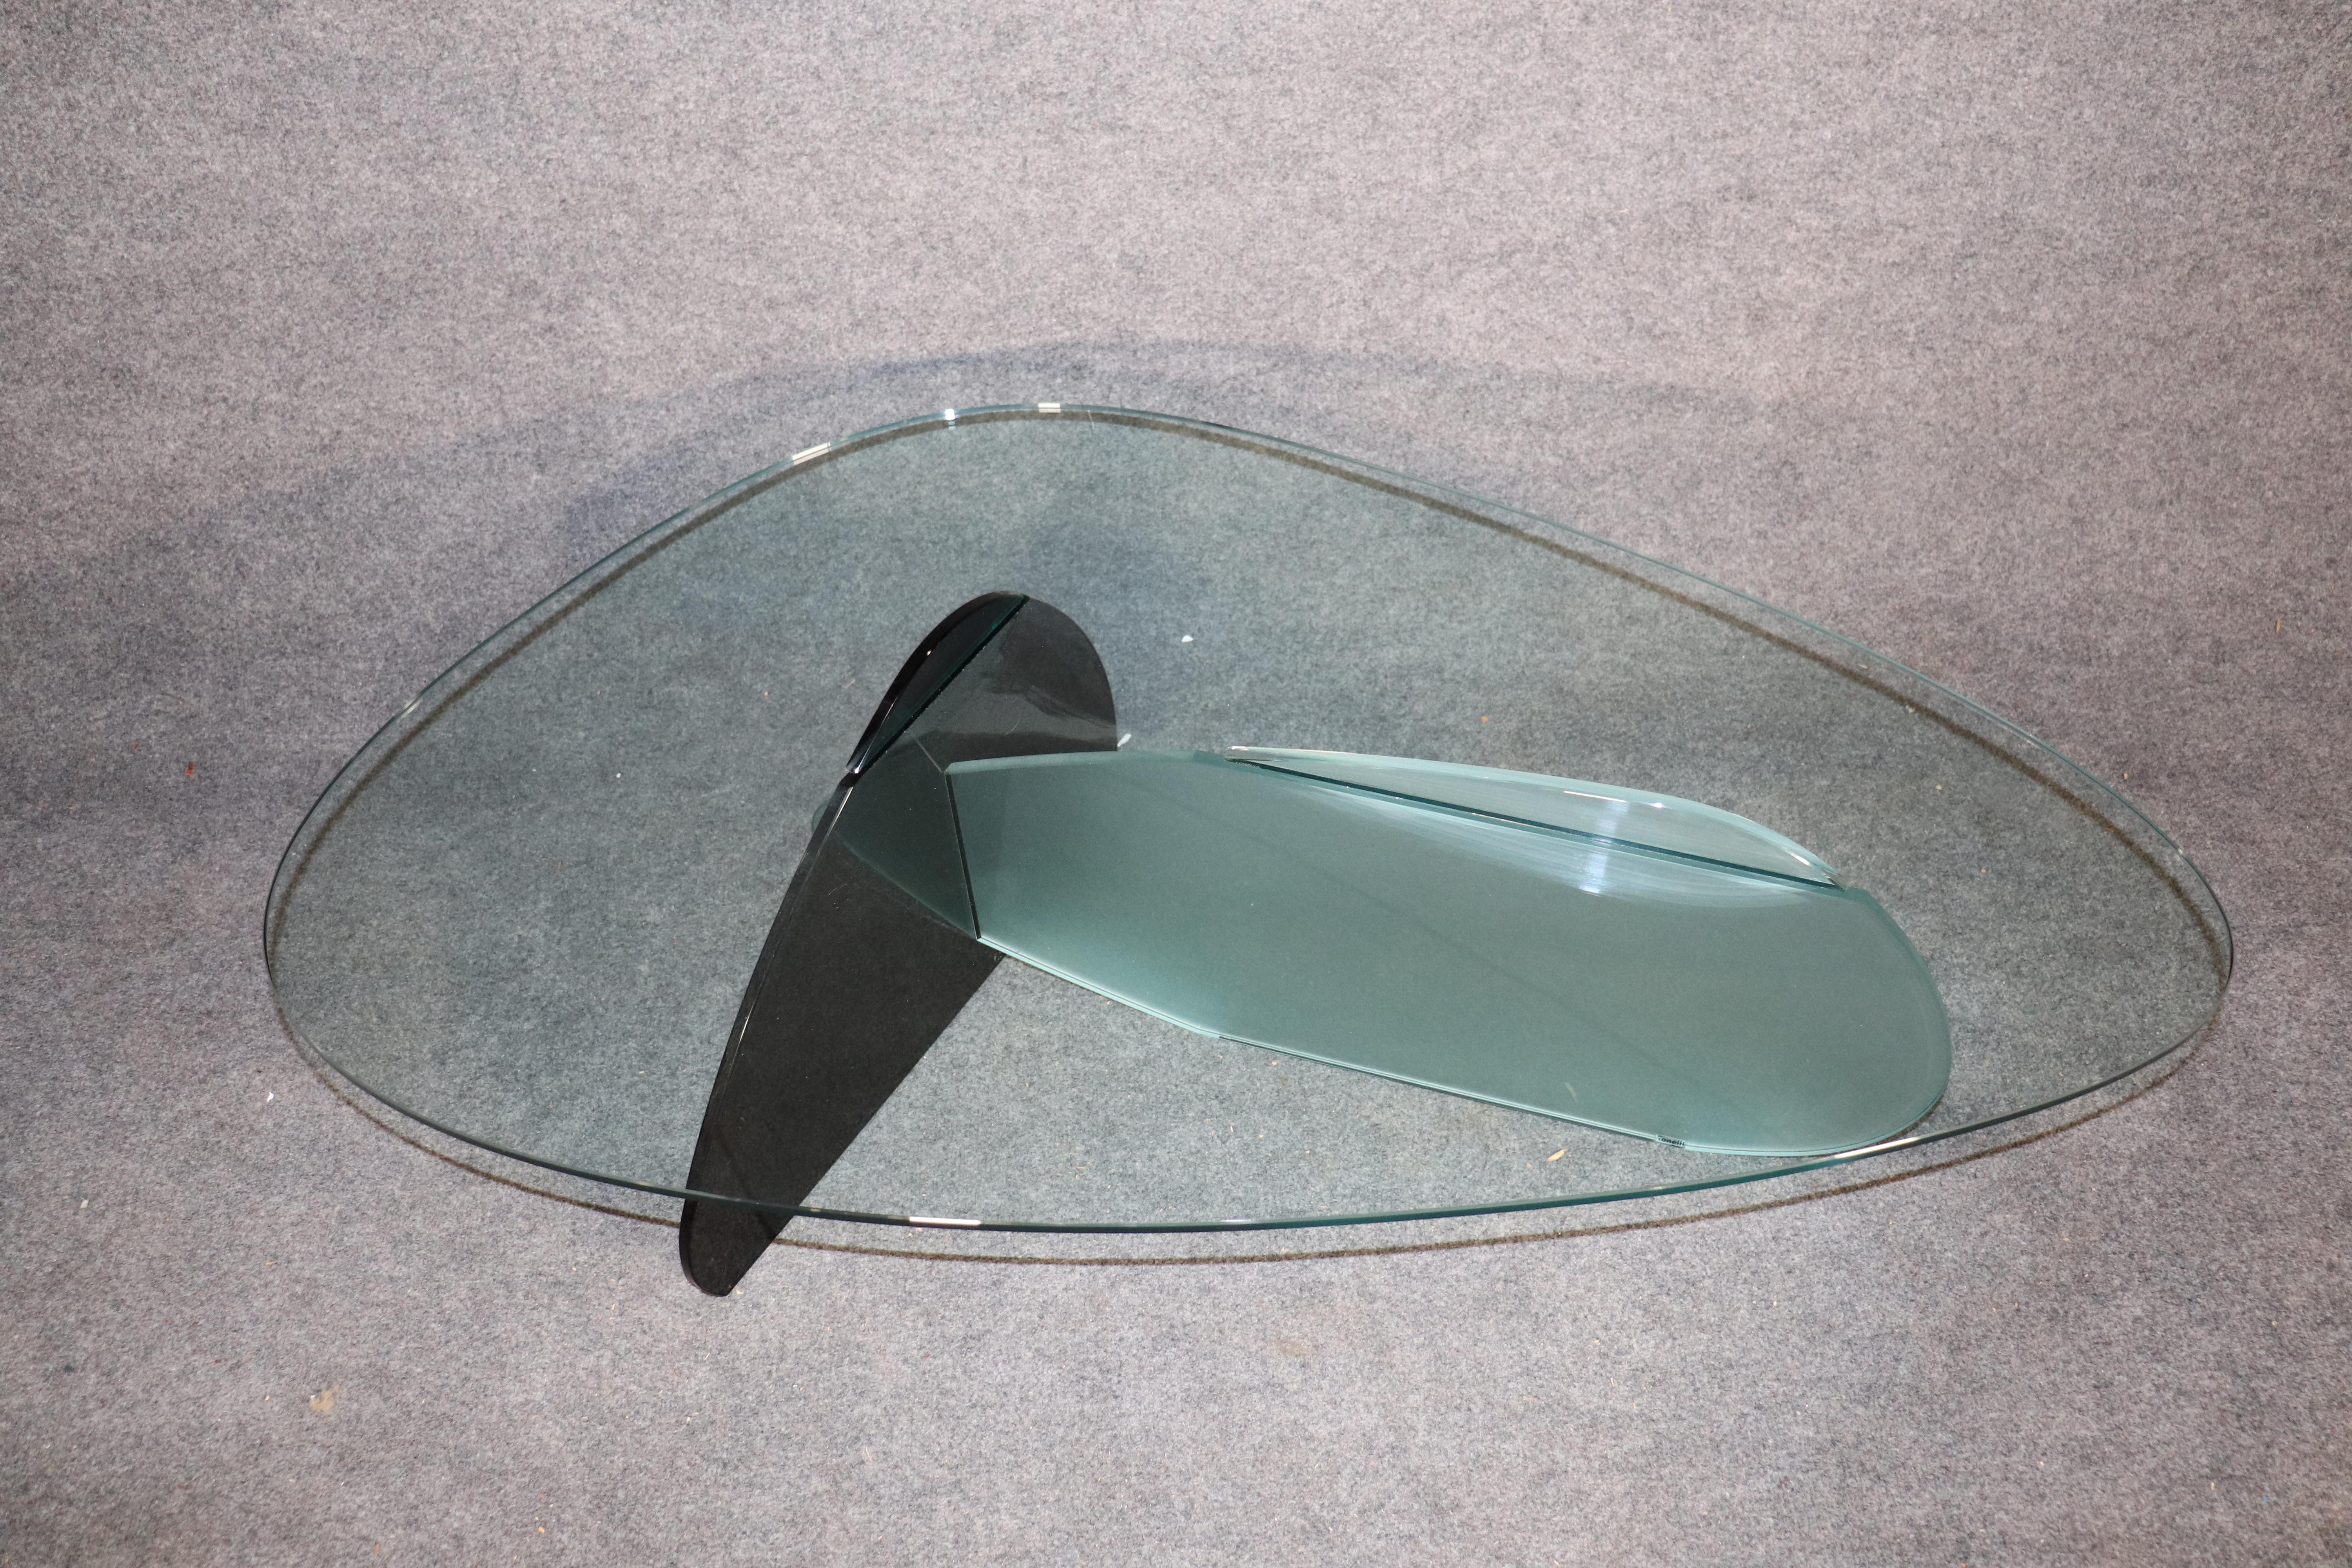 Mid-century style glass table with black and frosted glass base.
Please confirm location.